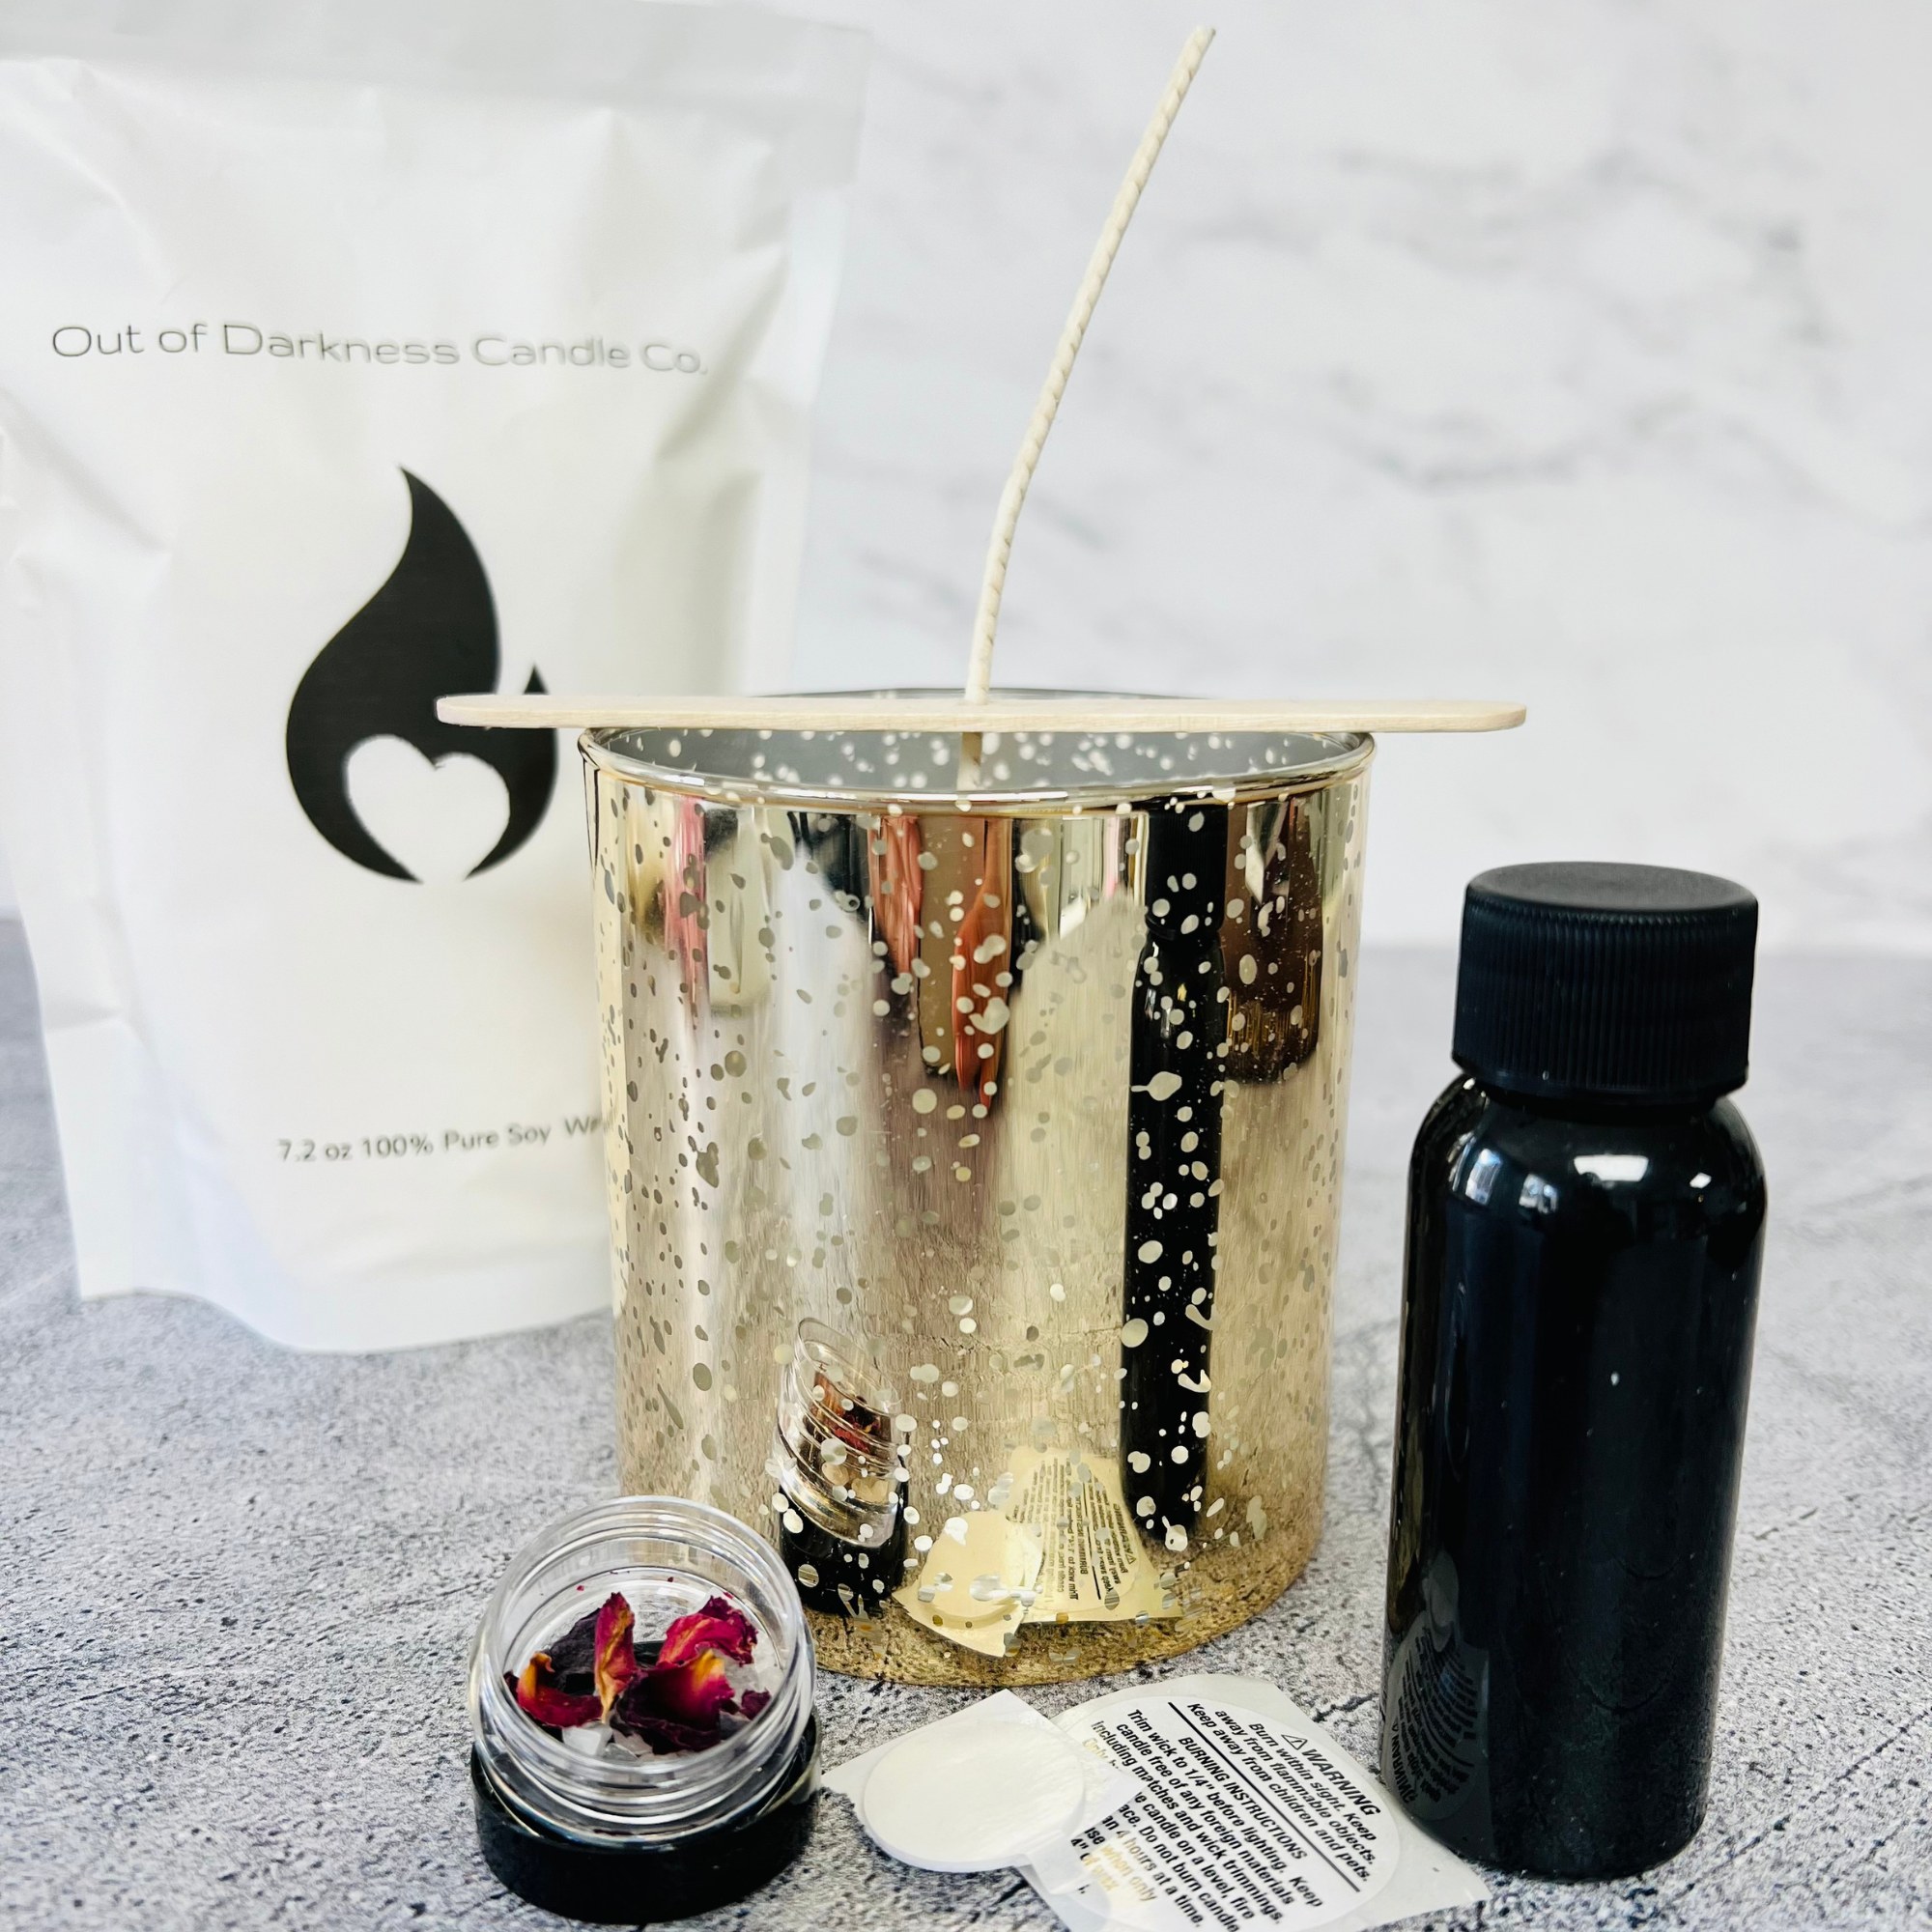 Gold fleck vessel with a cotton with and wooden holder surrounded by a black bottle, a warning sticker, a small container with rose petals and a white bag with black flame company logo on it